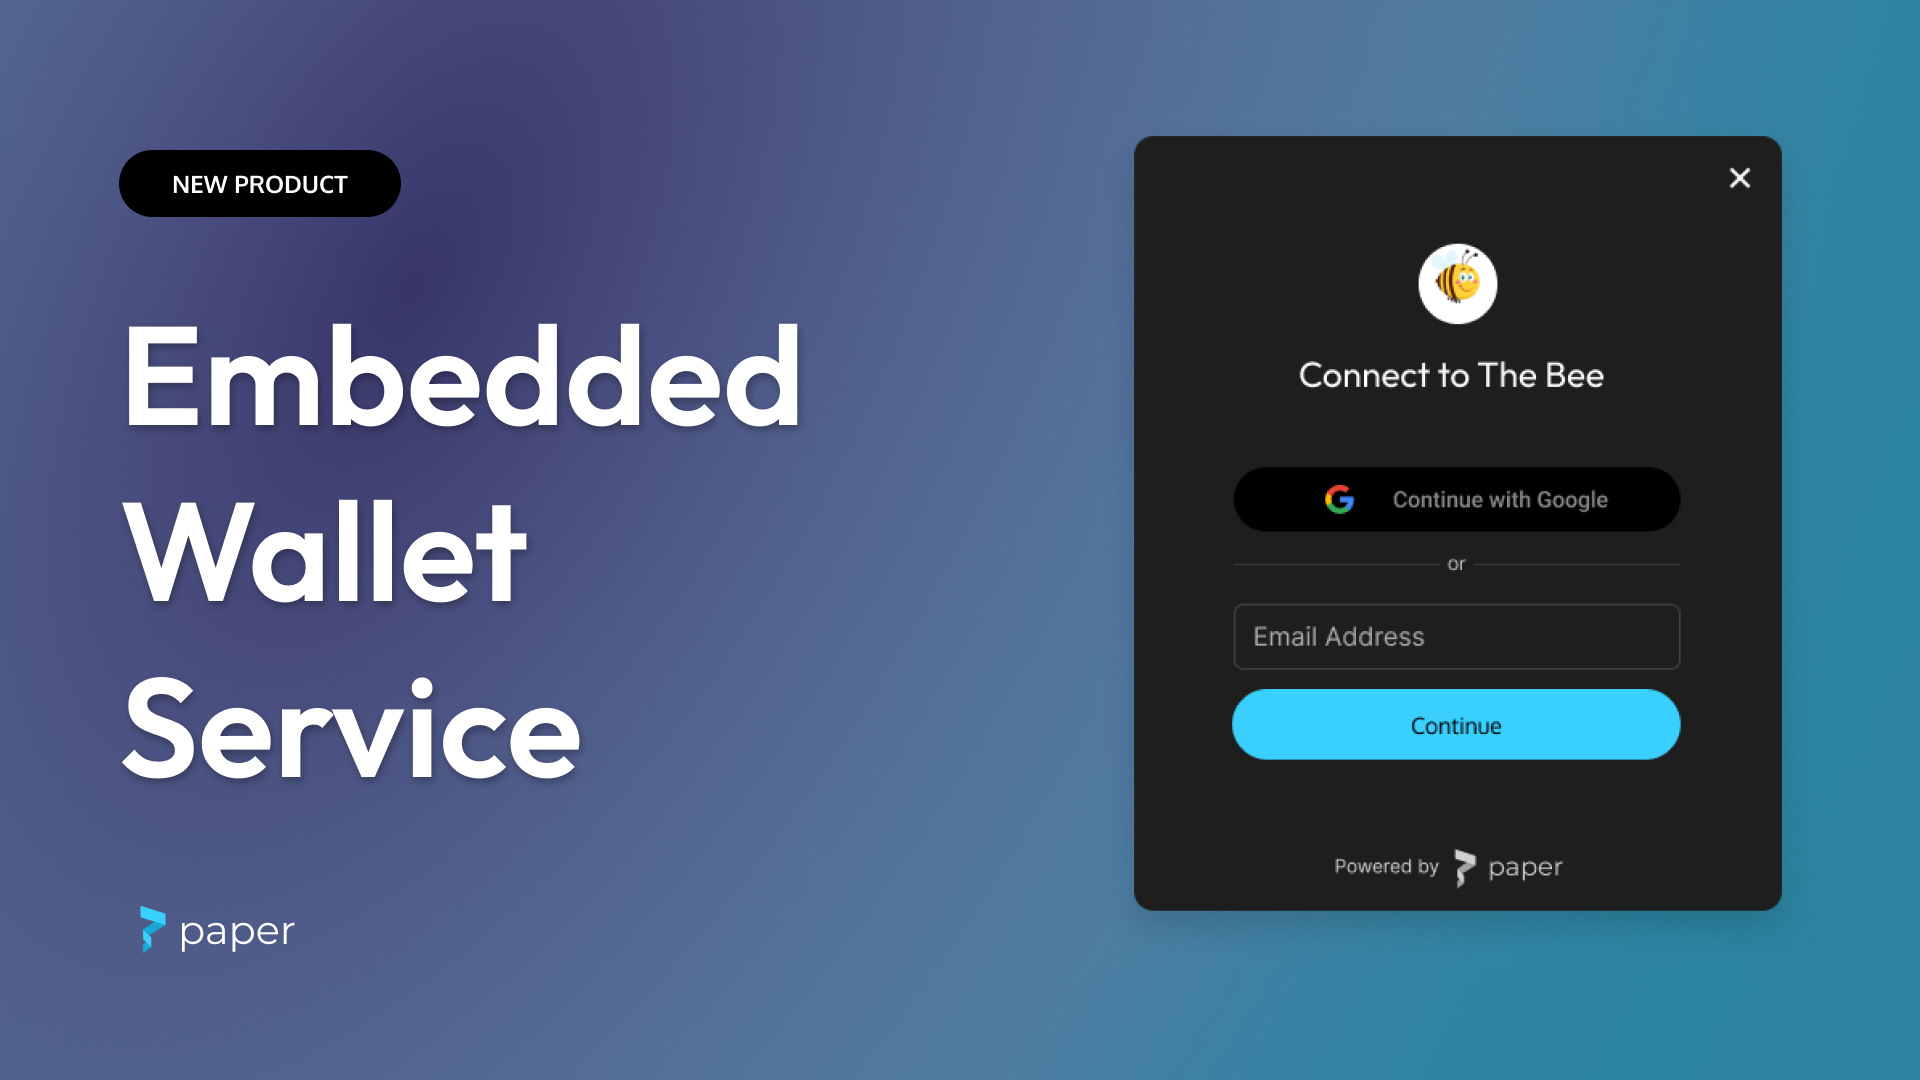 Announcing our Embedded Wallet Service